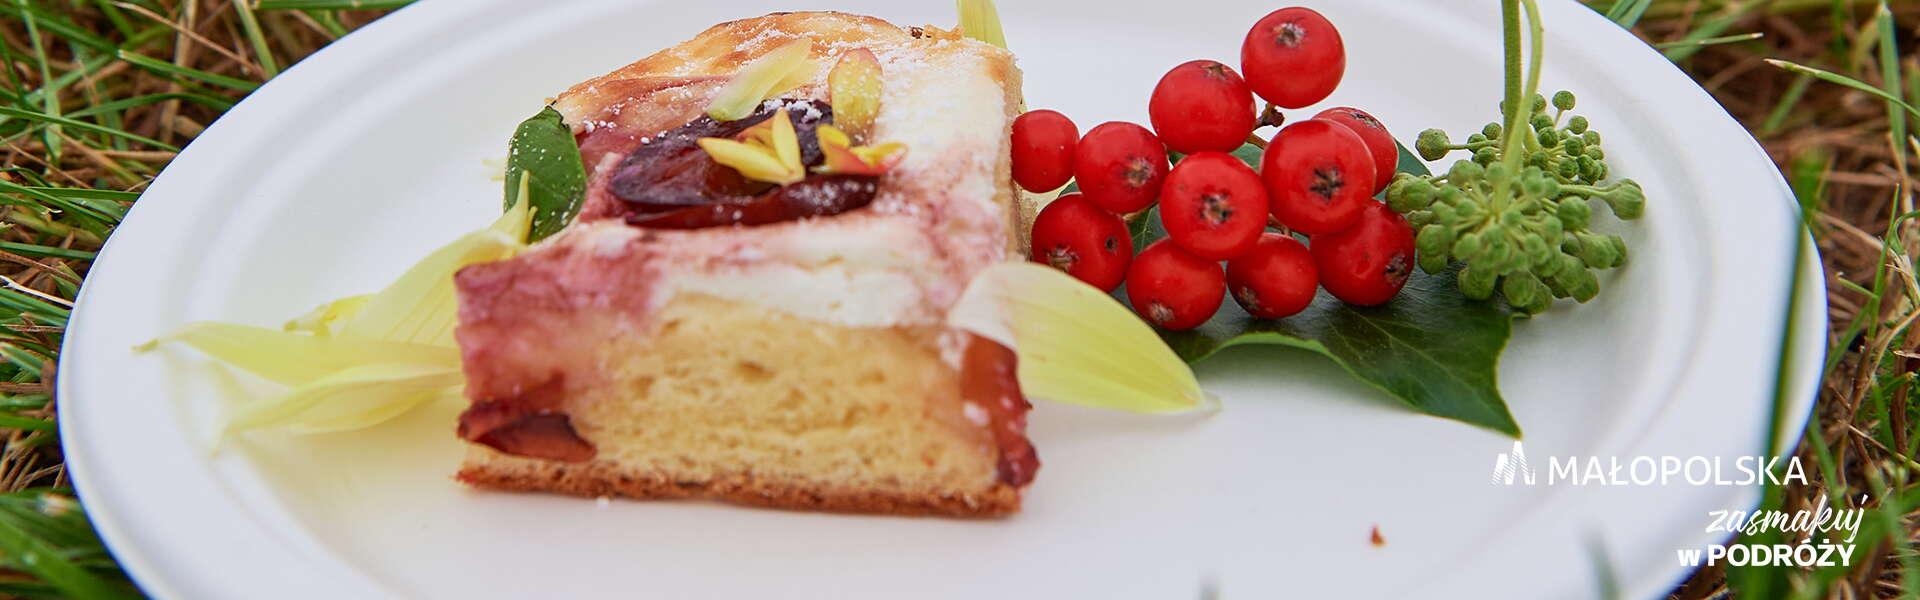 A piece of yeast cake with plums on a plate, next to the cake there is a decoration of rowan berries, in the lower right corner there is the Małopolska logo and the inscription 